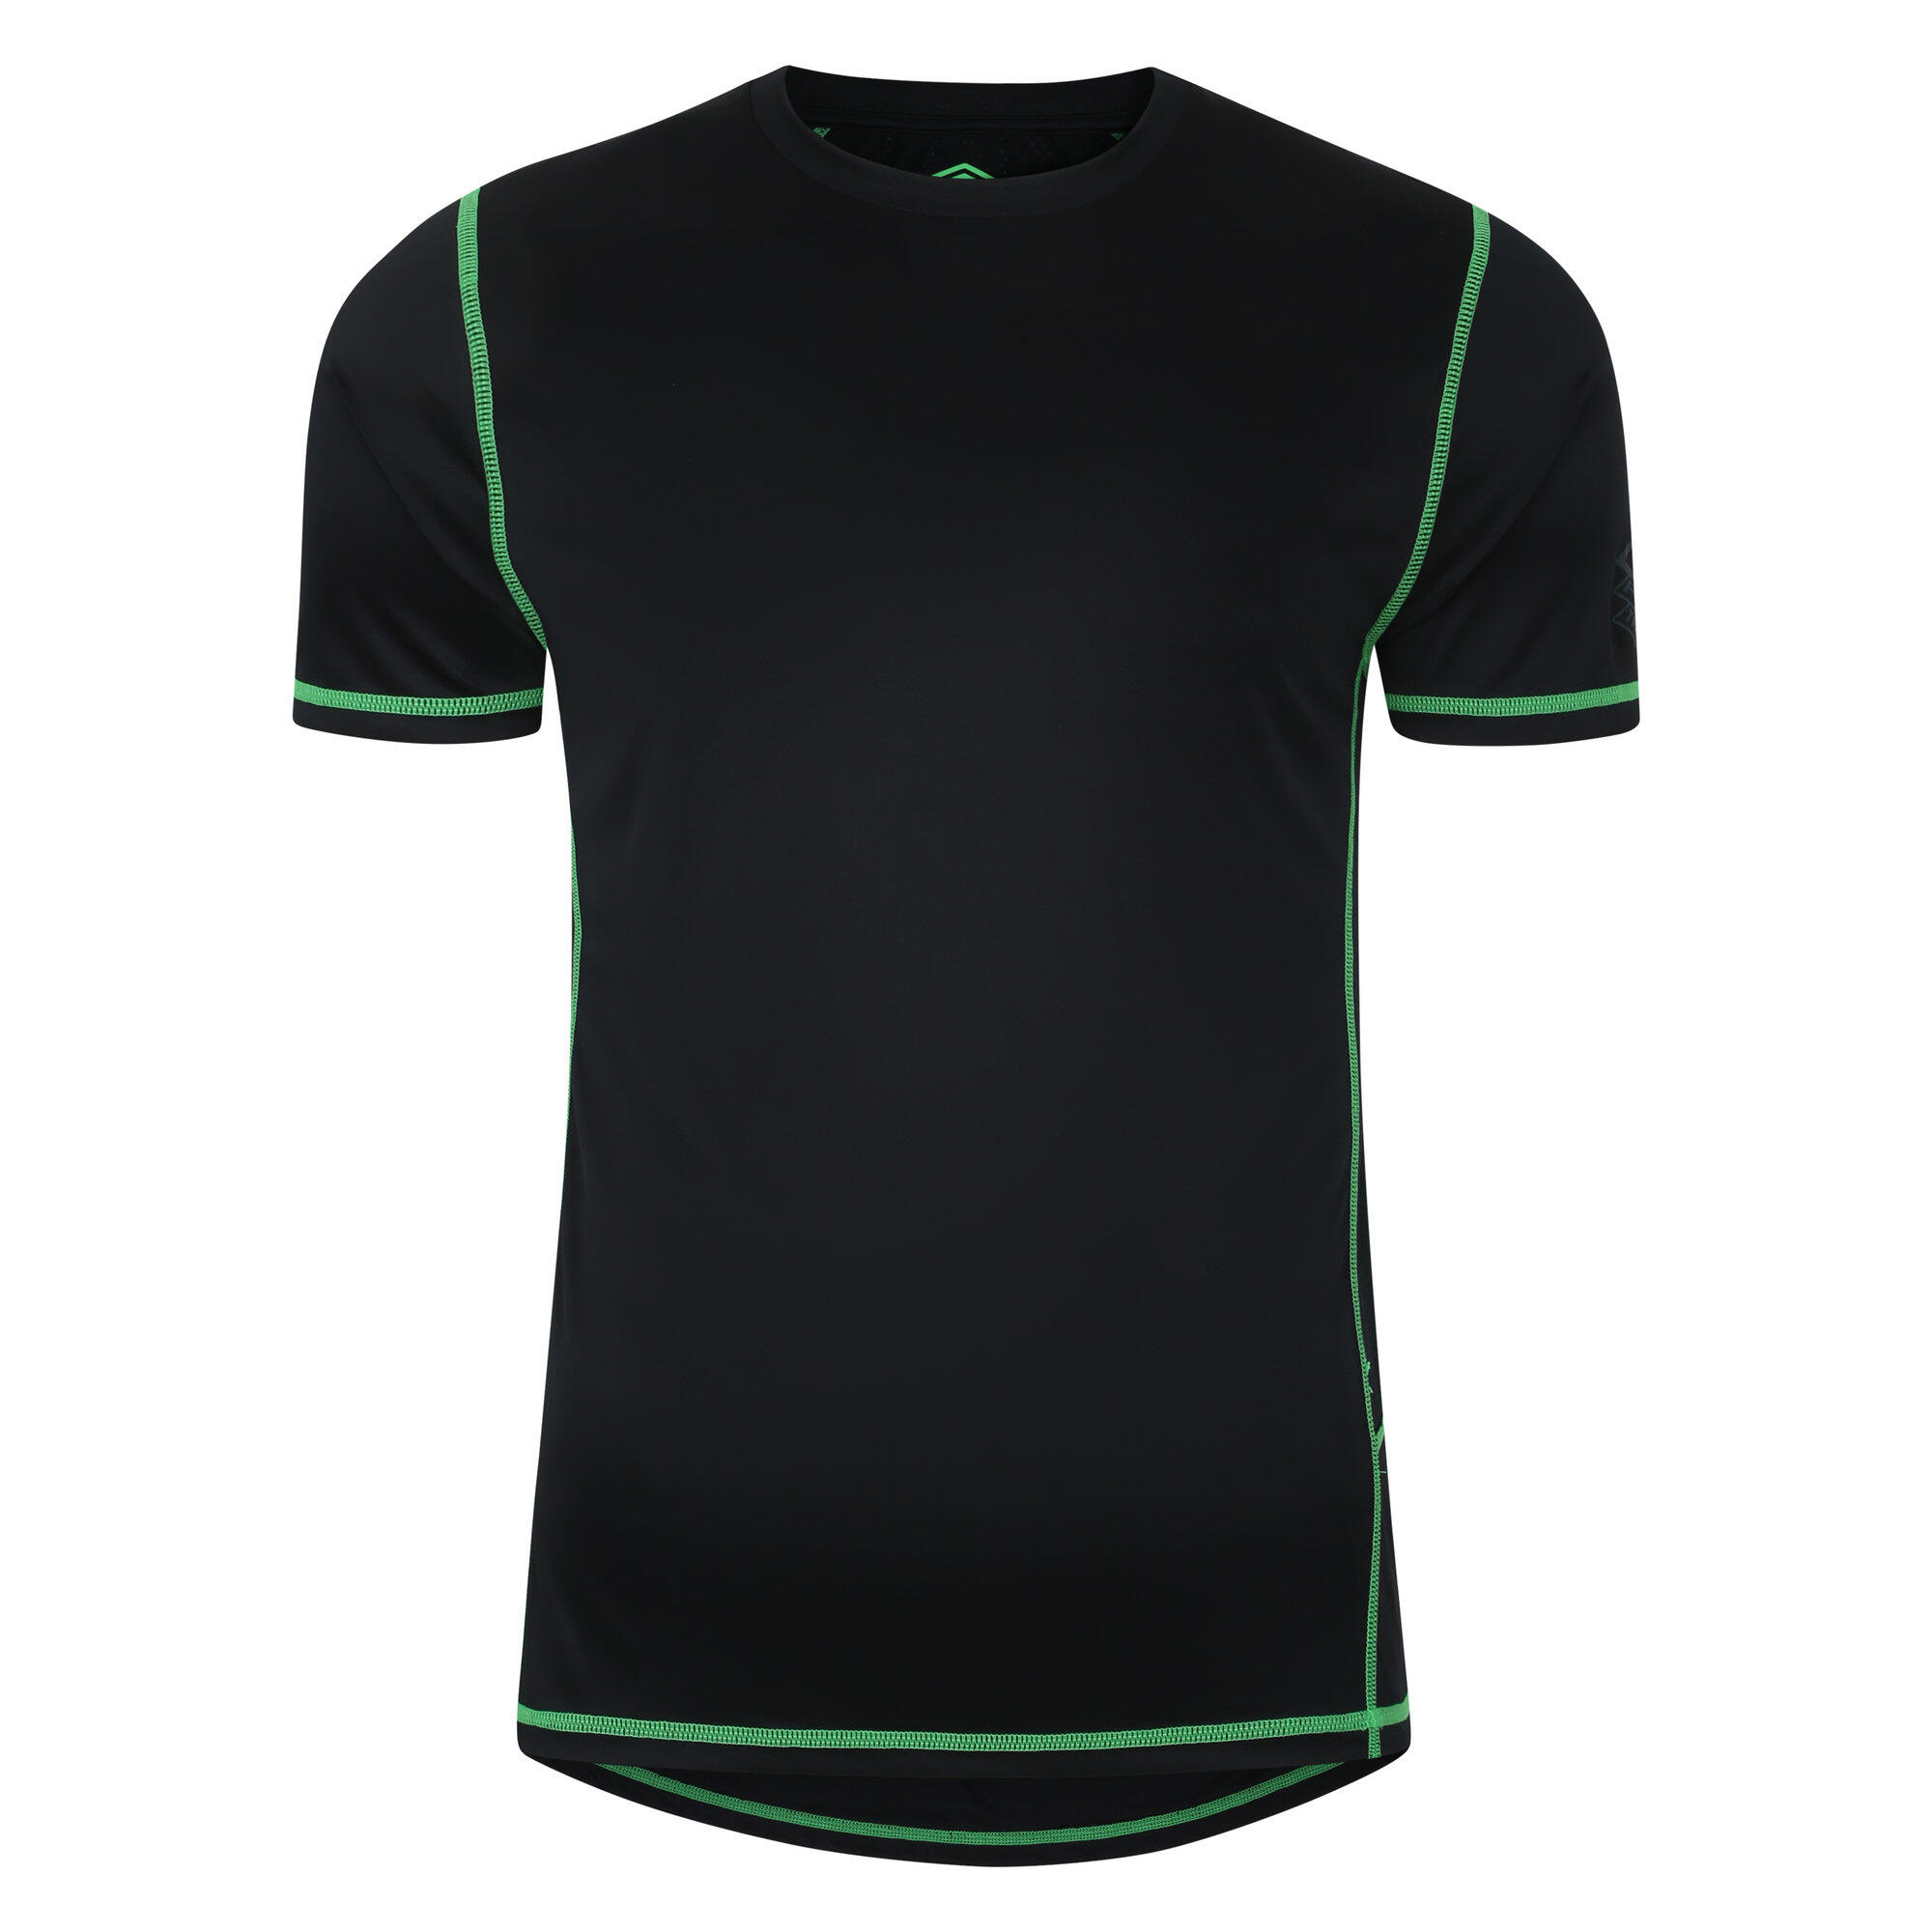 UMBRO Mens Pro Polyester Training TShirt (Black/Andean Toucan)